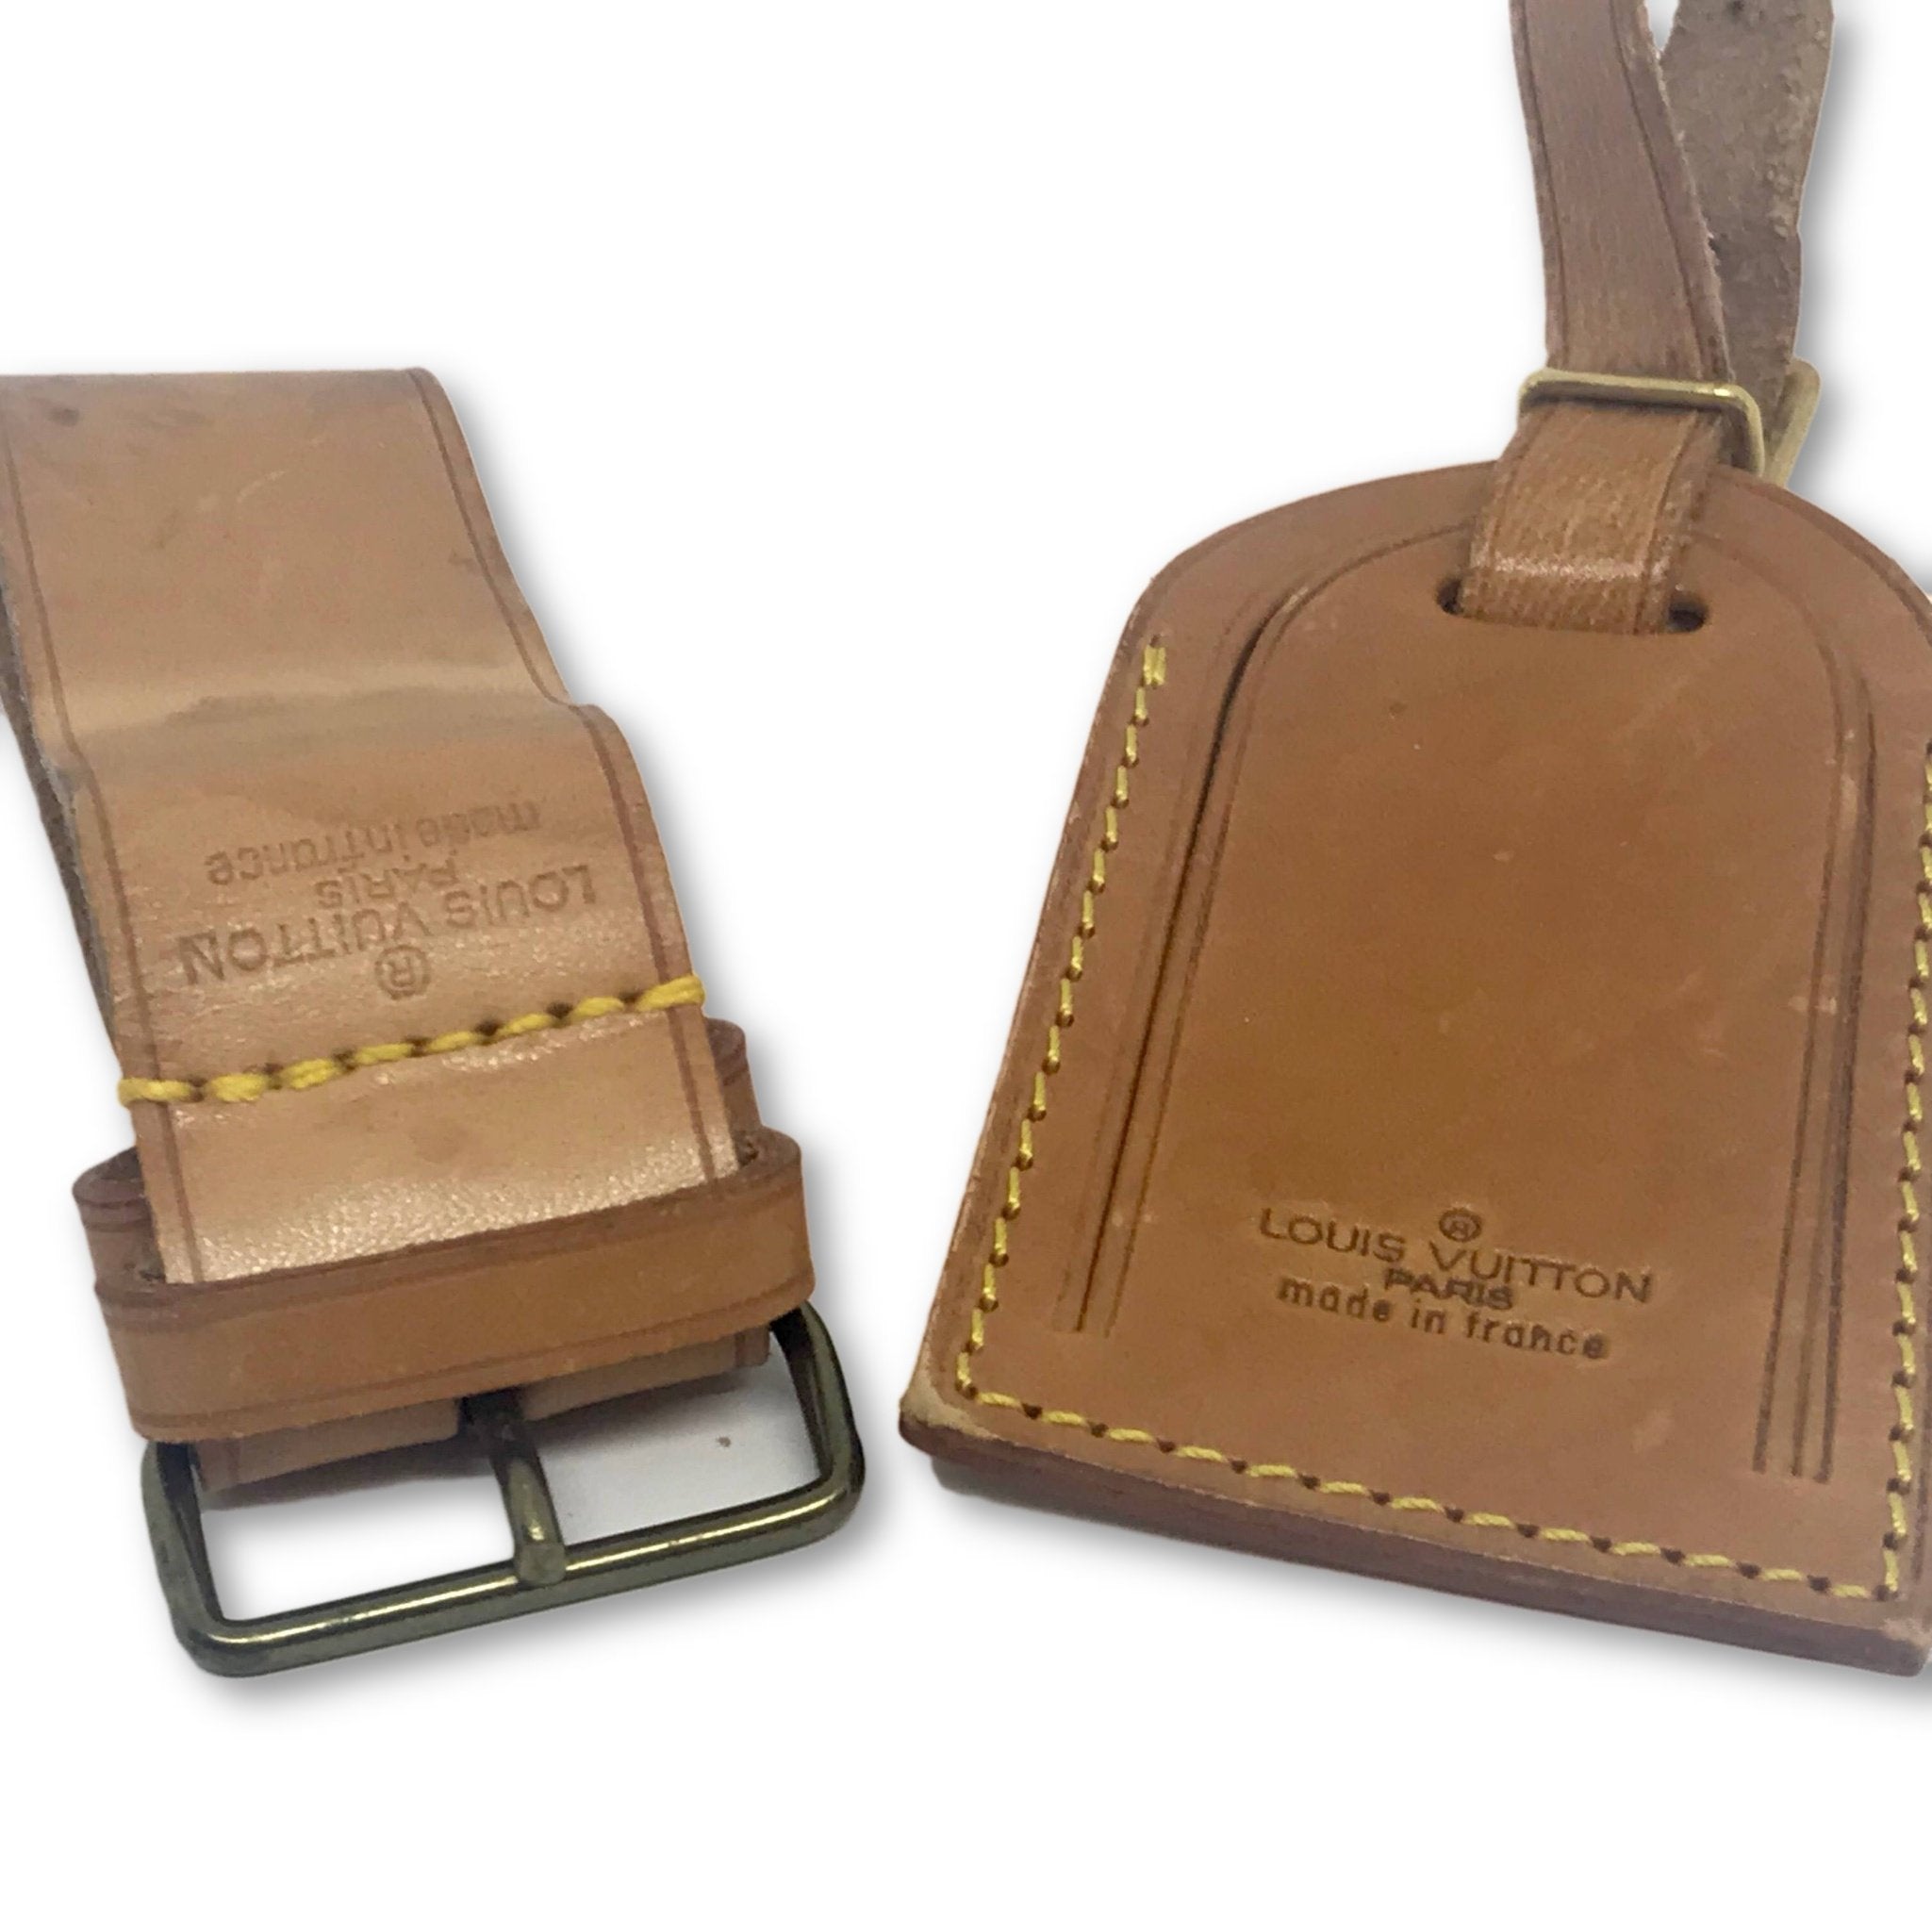 My Louis Vuitton luggage tag collection and locations – Camietedie